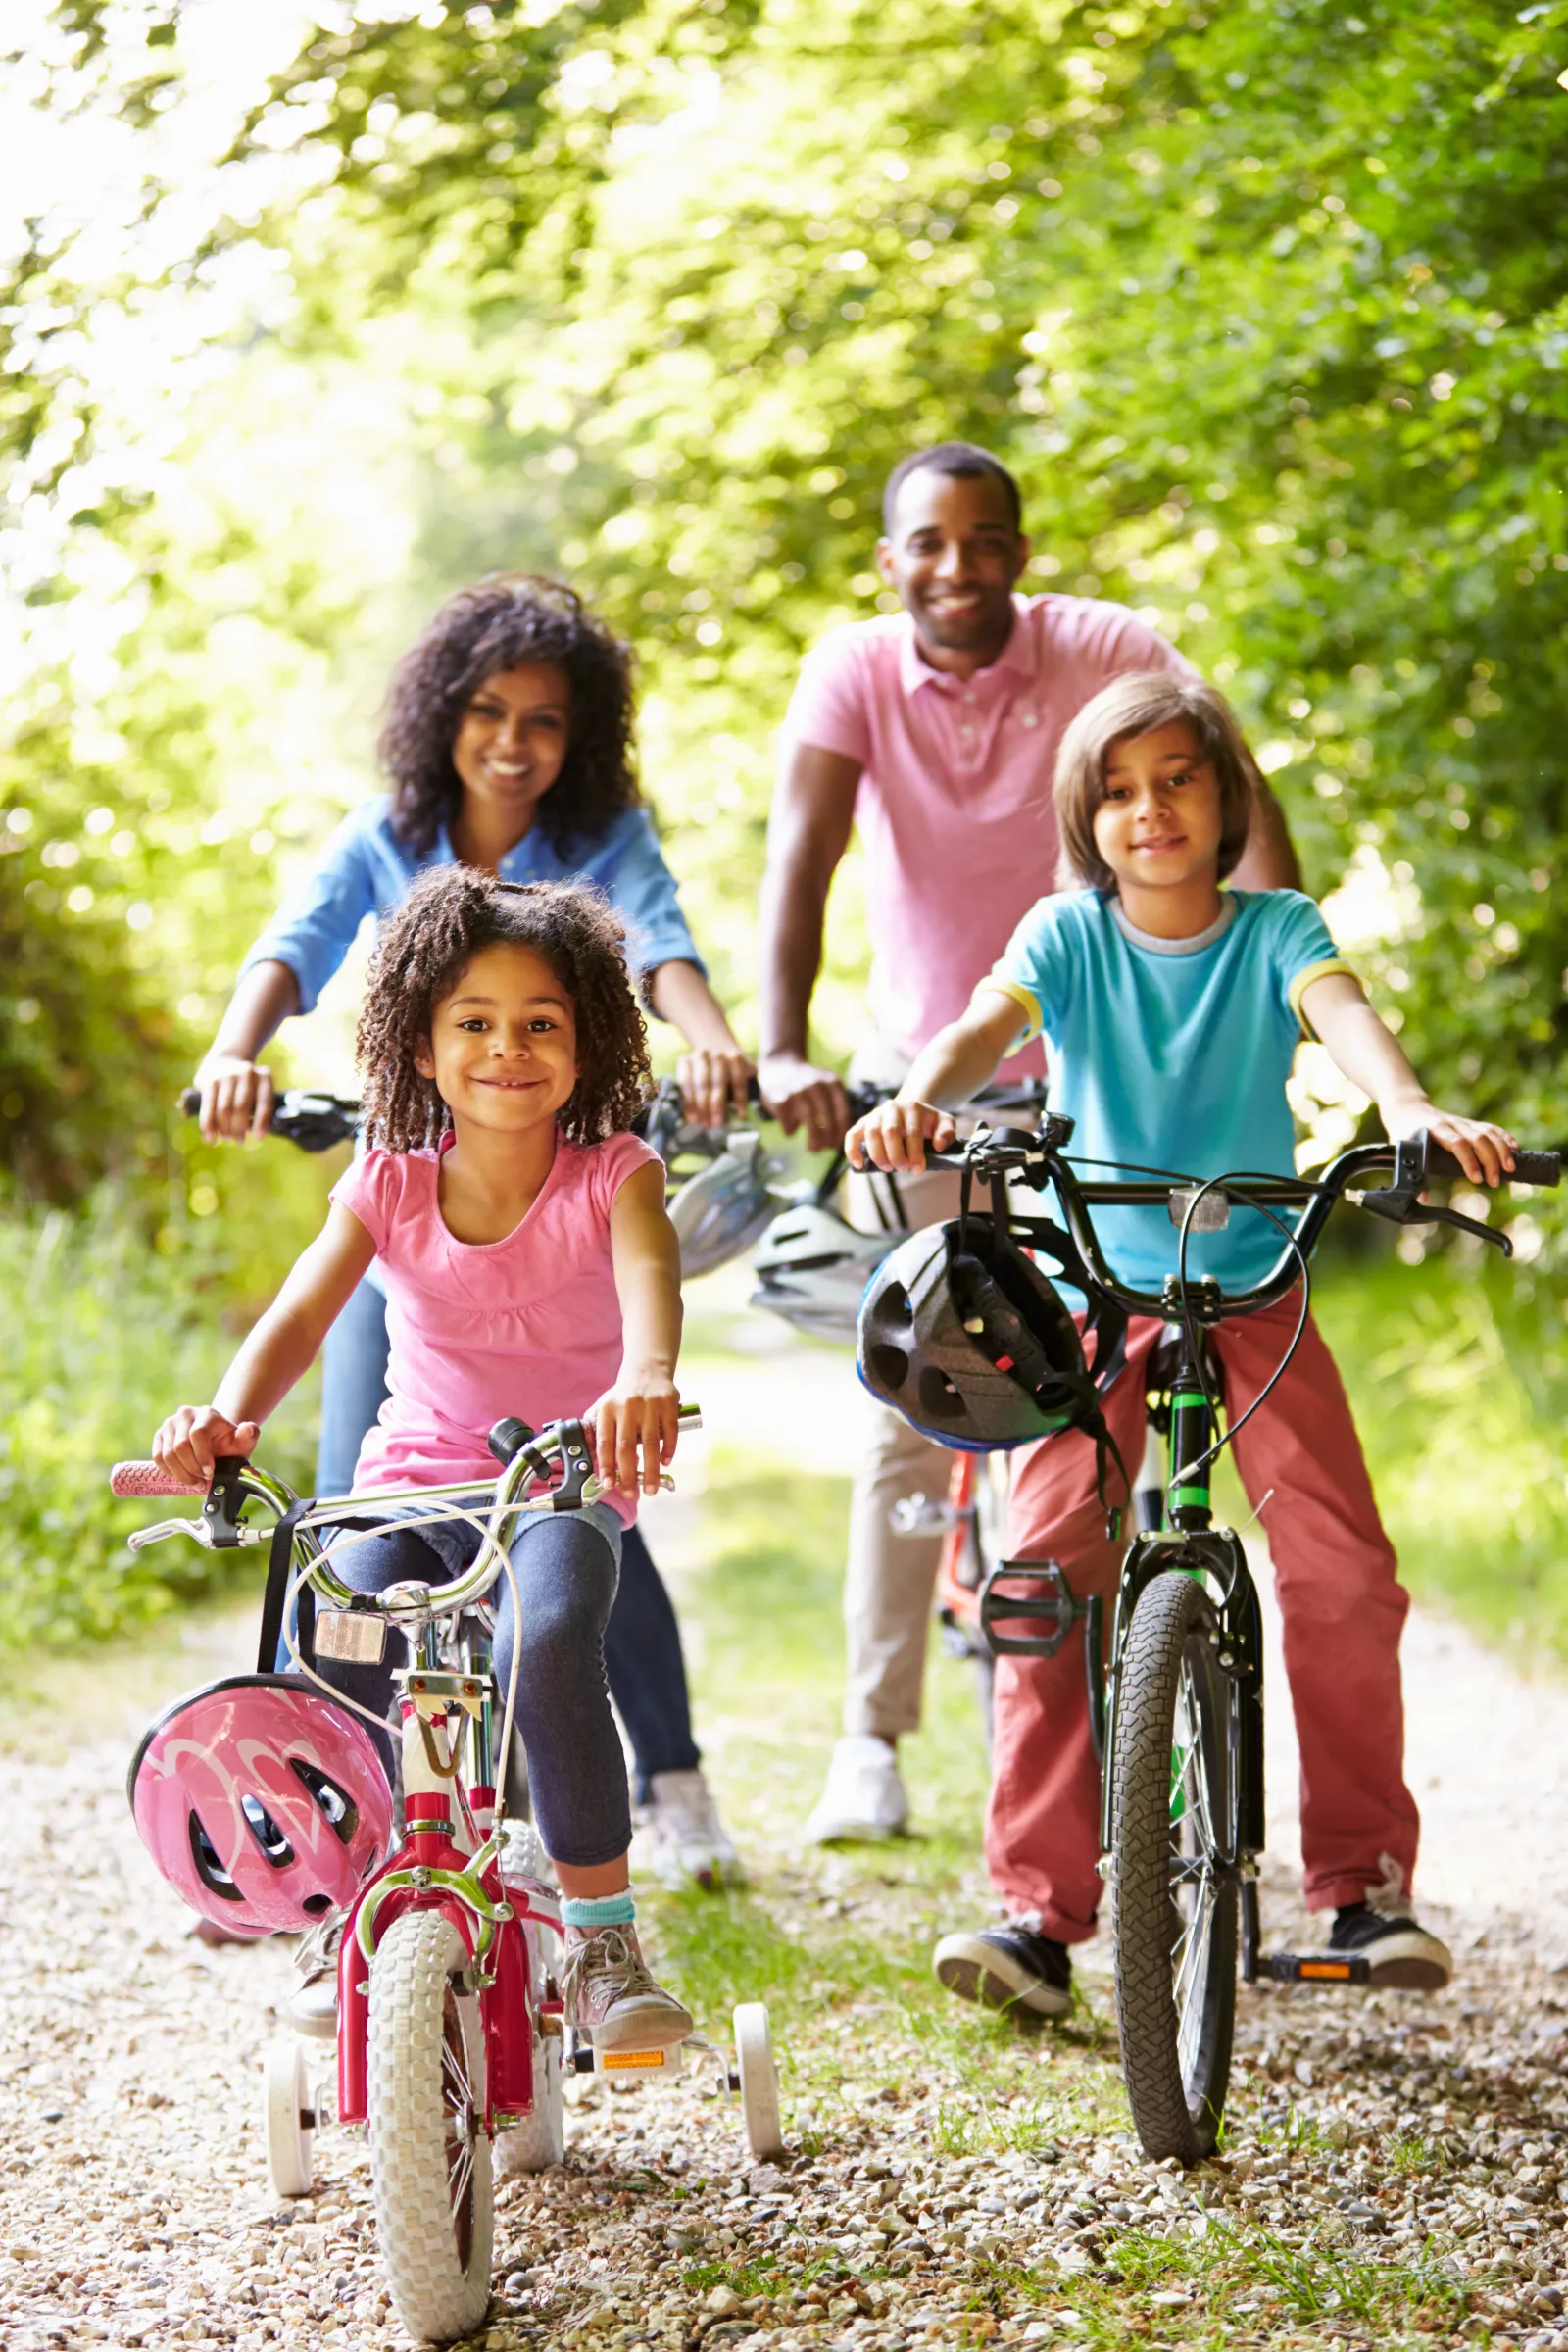 A family of four riding bikes together on a trail outdoors